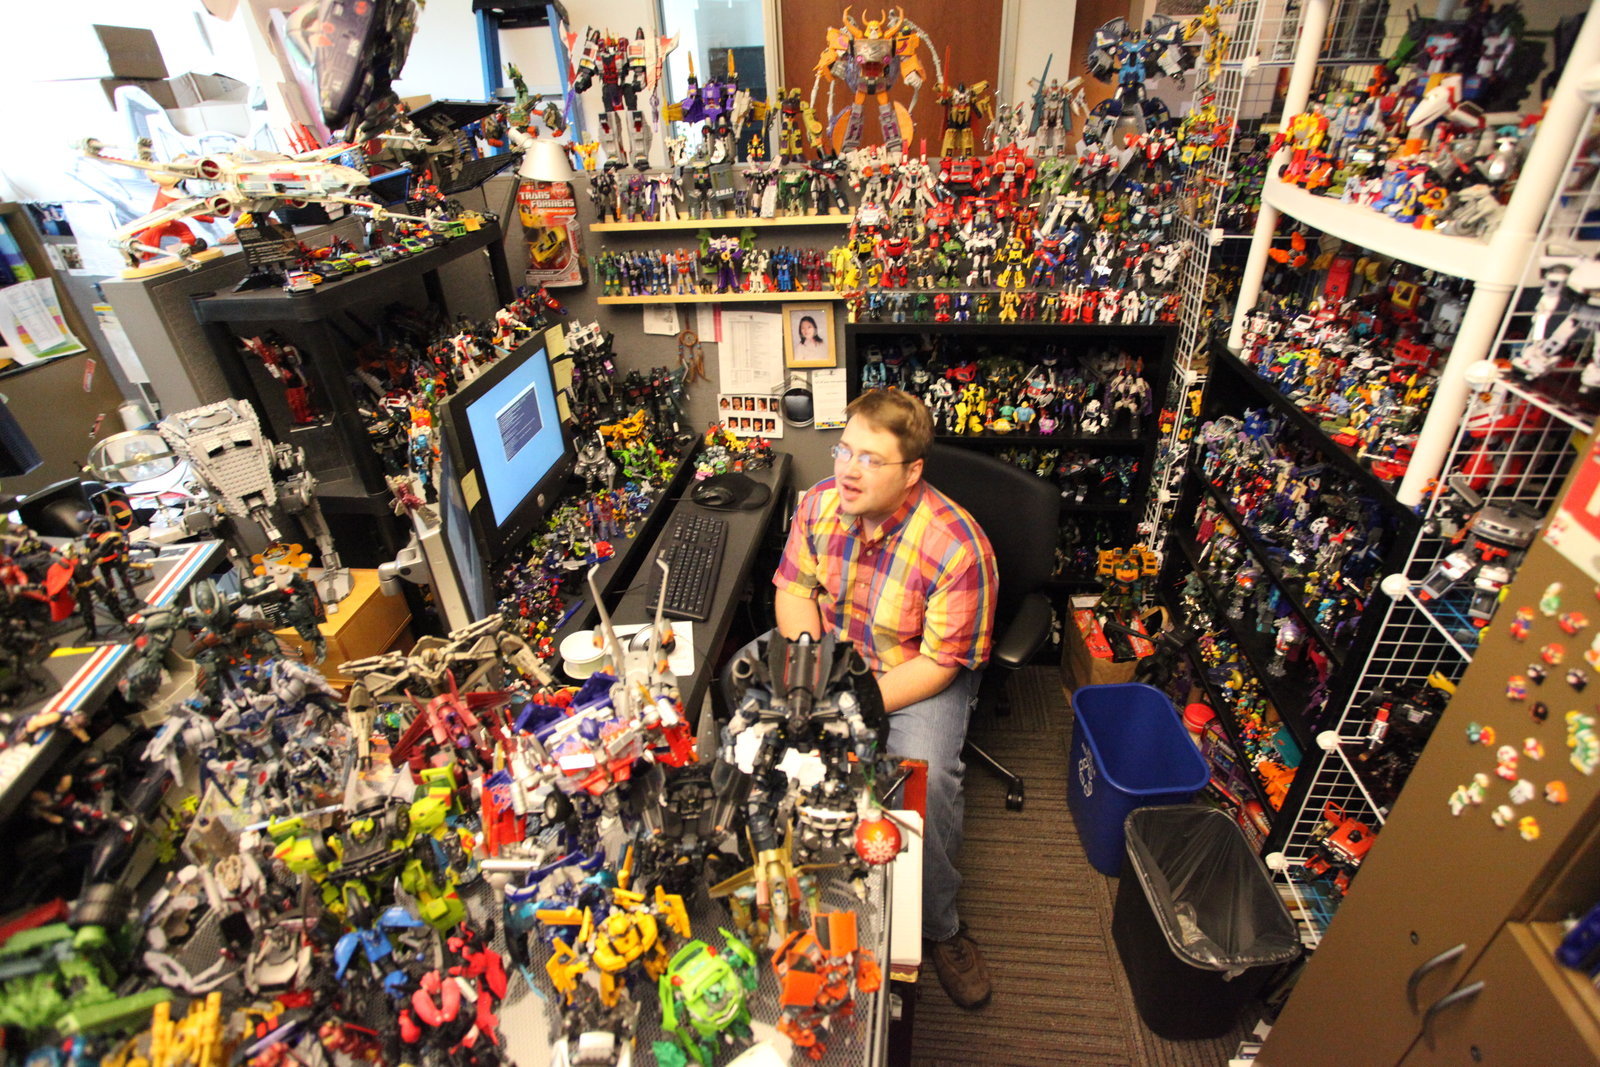 A typical Transformers collector in his happy place